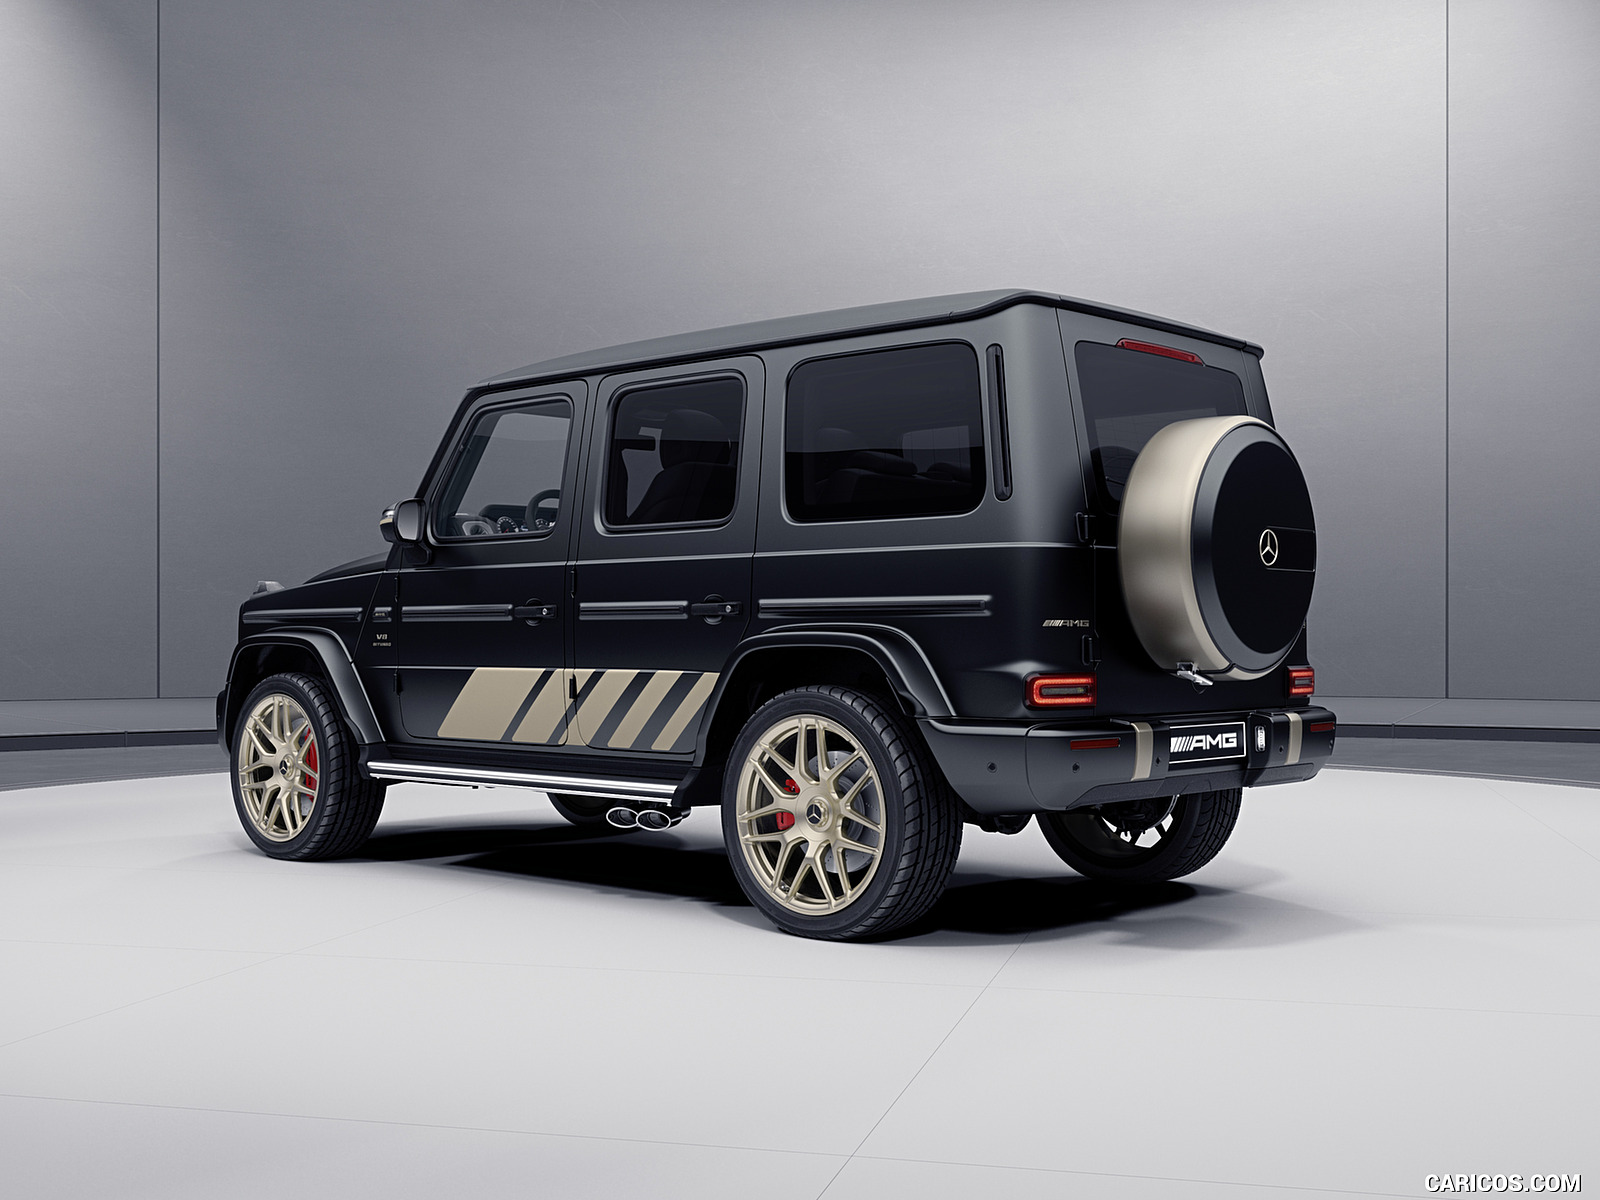 The Mercedes-AMG G 63 Grand Edition flew off the shelves in just 6 minutes in India, with a whopping 12,768 Mercedes cars and SUVs sold till September